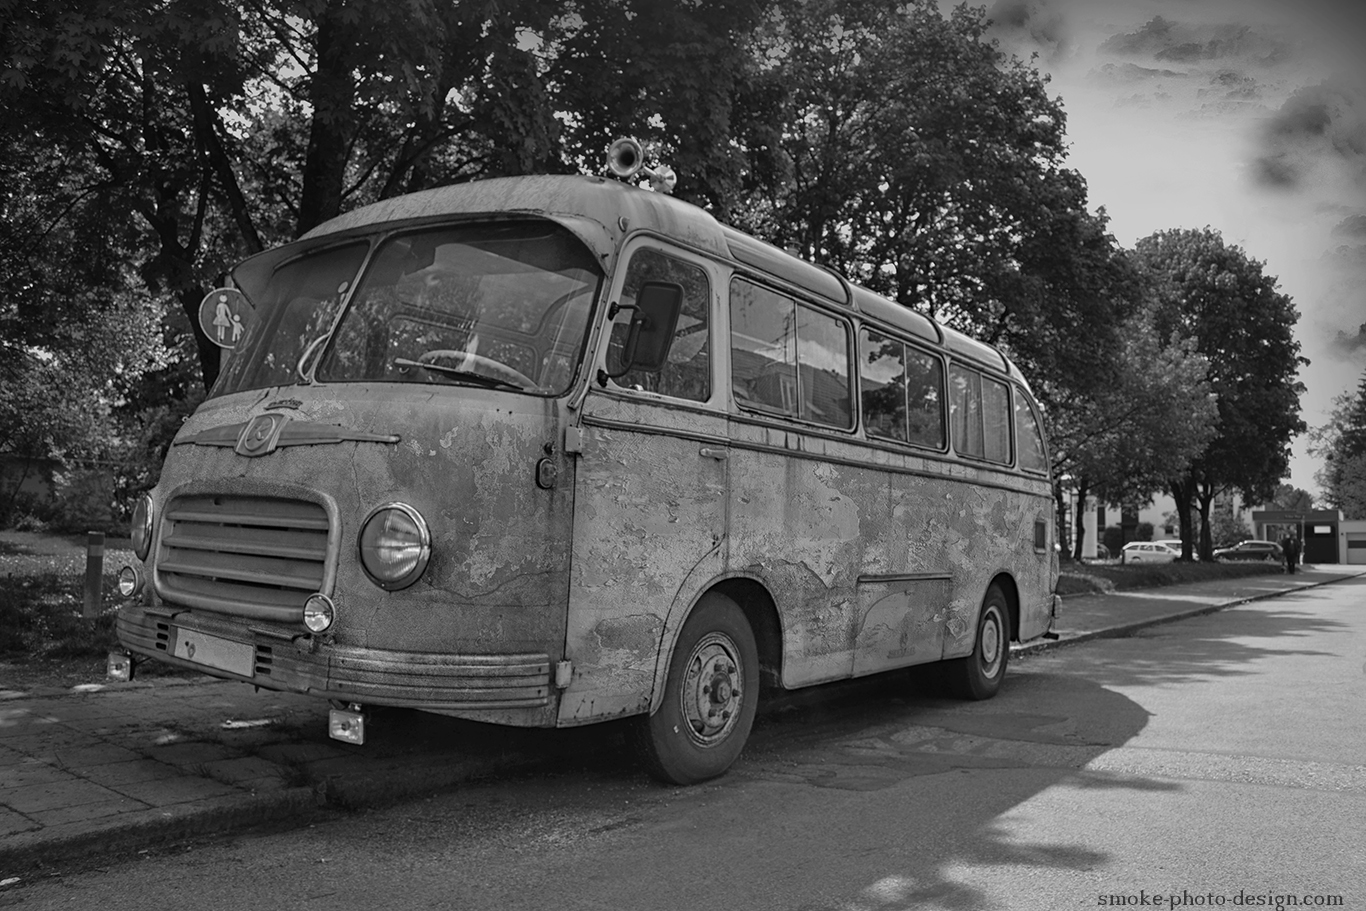 Old_Bus